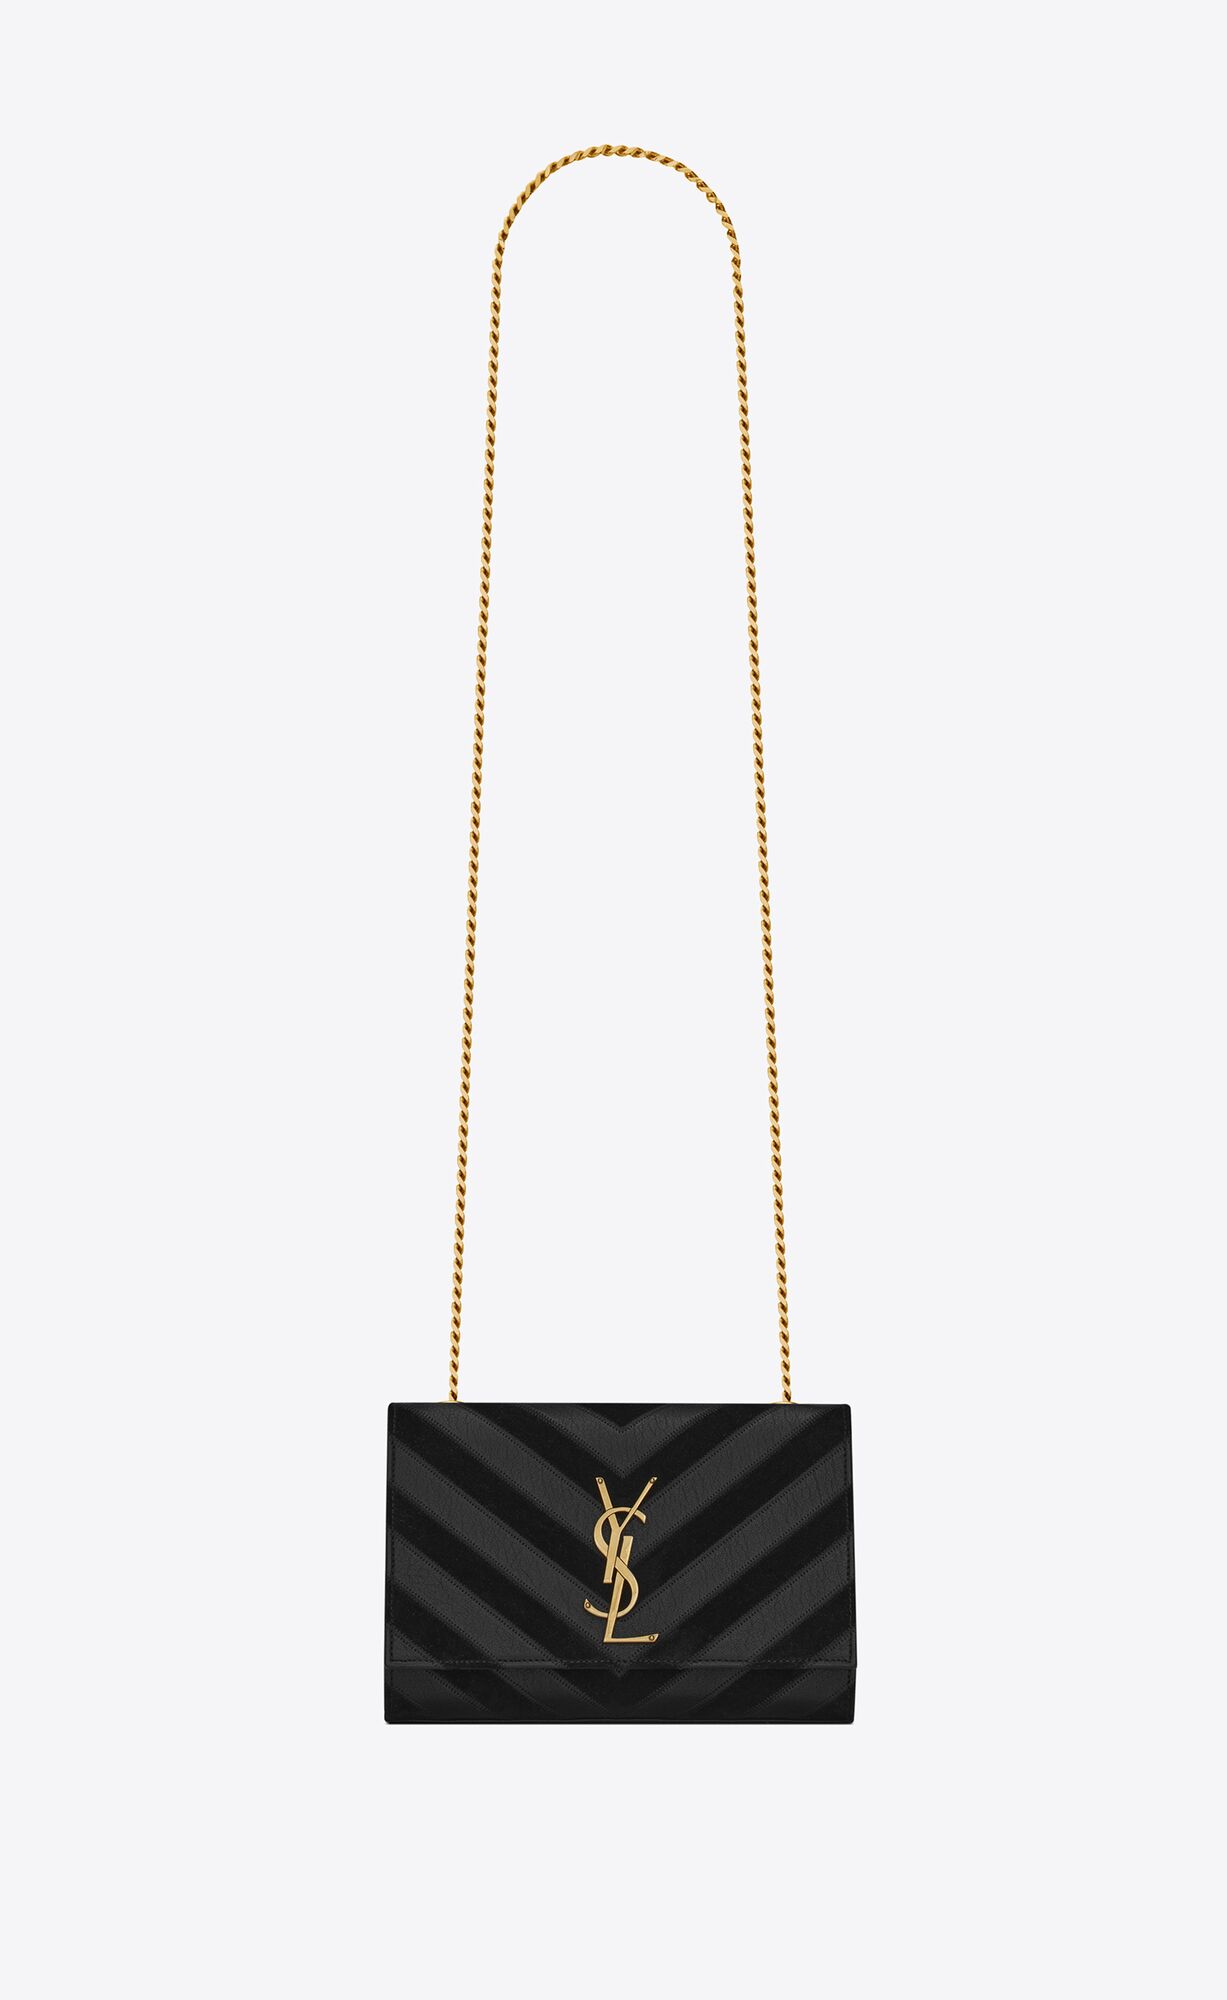 Saint Laurent Kate Small Chain Bag In Quilted Leather And Suede – Black – 4712860JJN71000